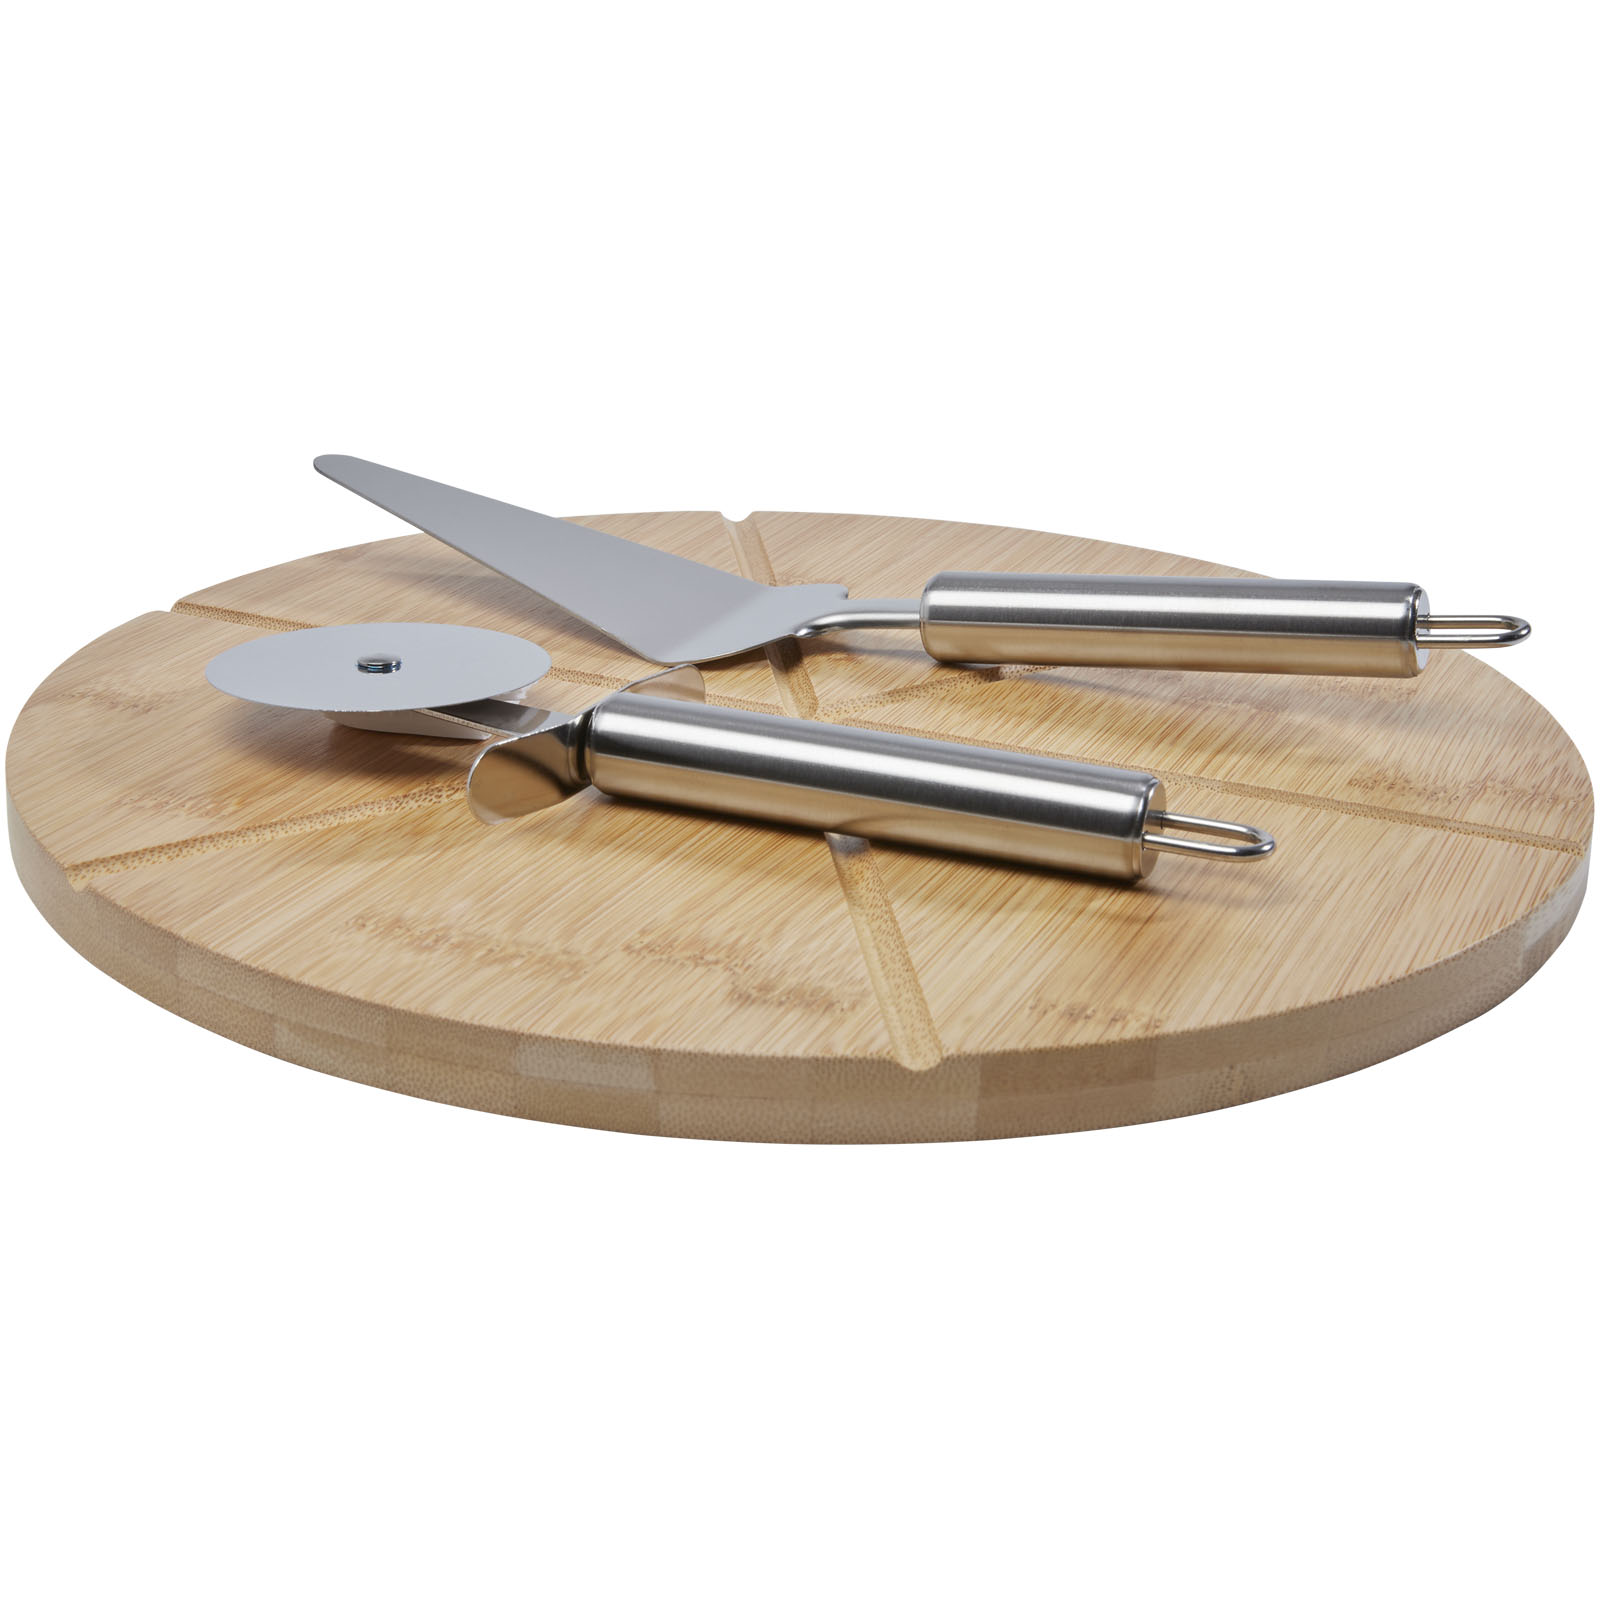 Home & Kitchen - Mangiary bamboo pizza peel and tools